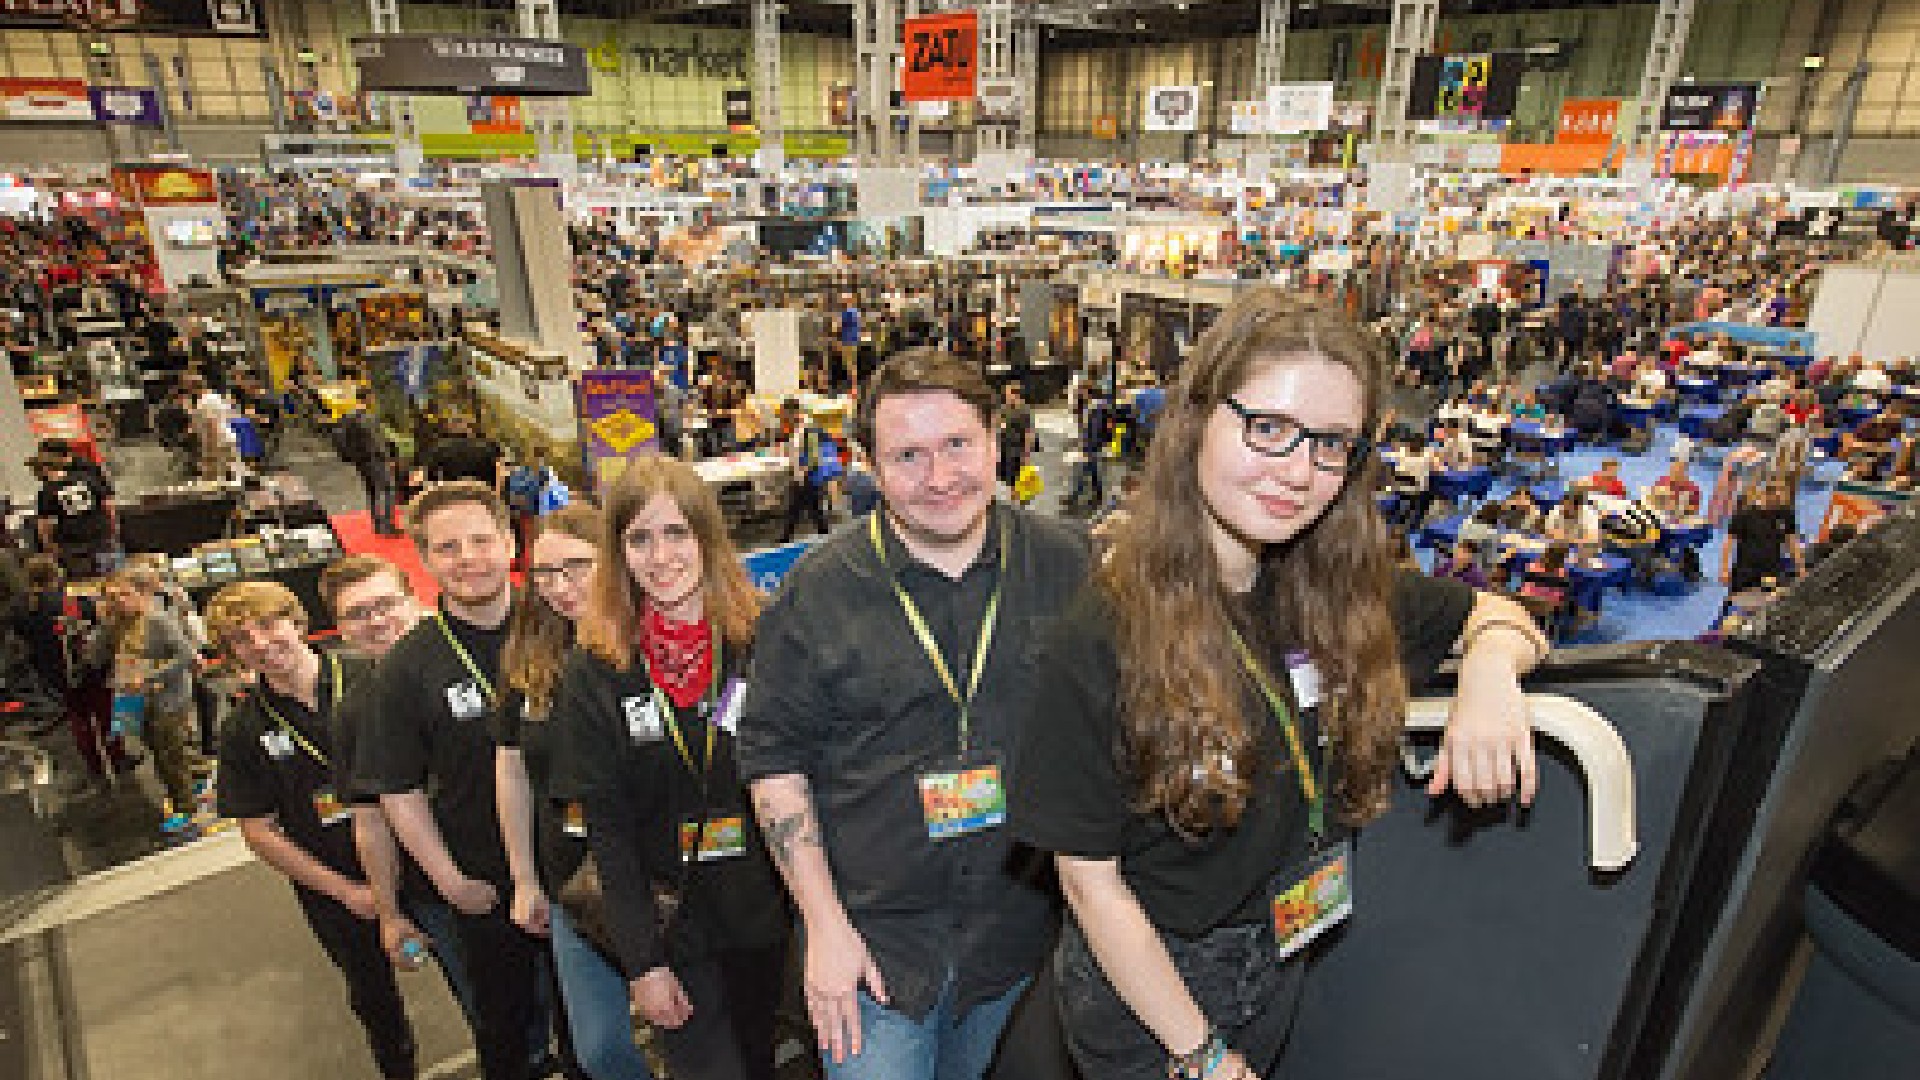 An image of a group of Edge Hill students at the UK games expo.